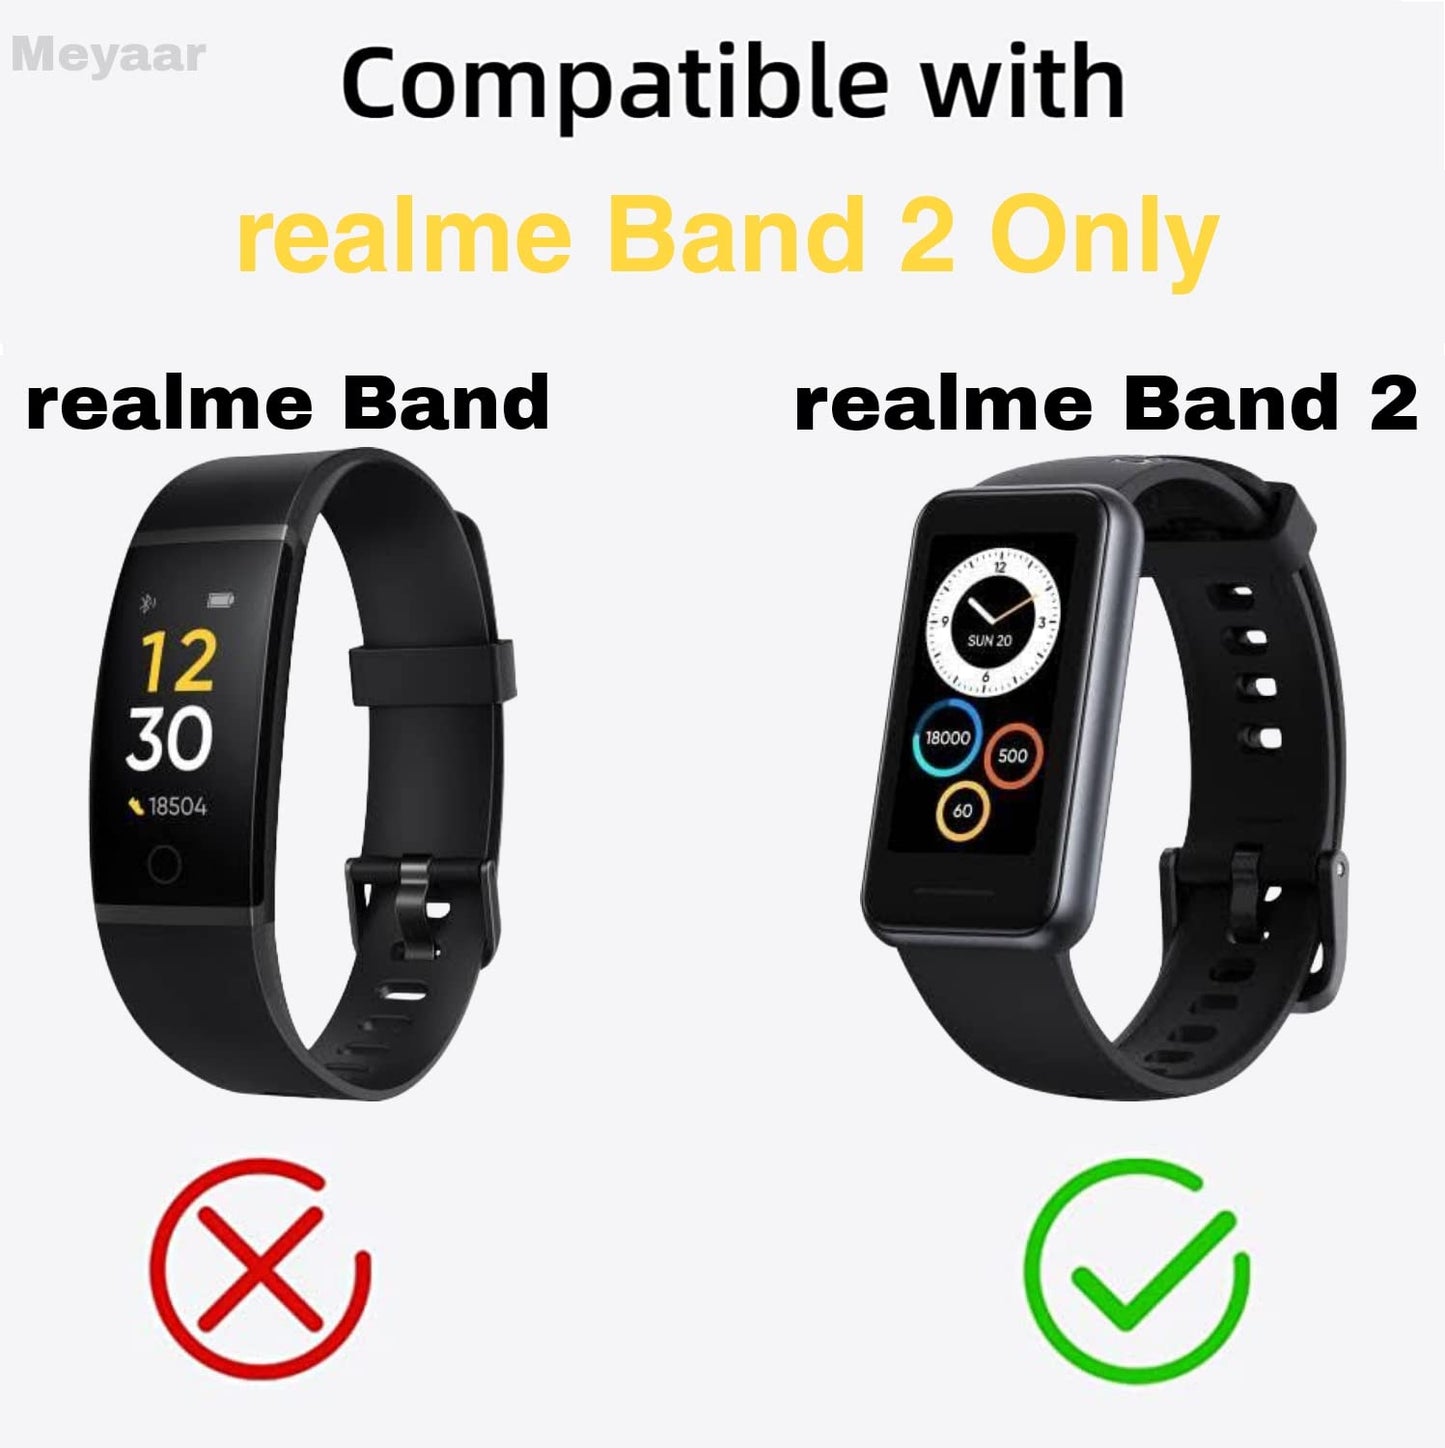 Meyaar Strap Band Only Compatible With realme Band 2 (Not For Any other Brand Watch) : (Tracker Not Included) (Strap Only) (Silicone (Grey))